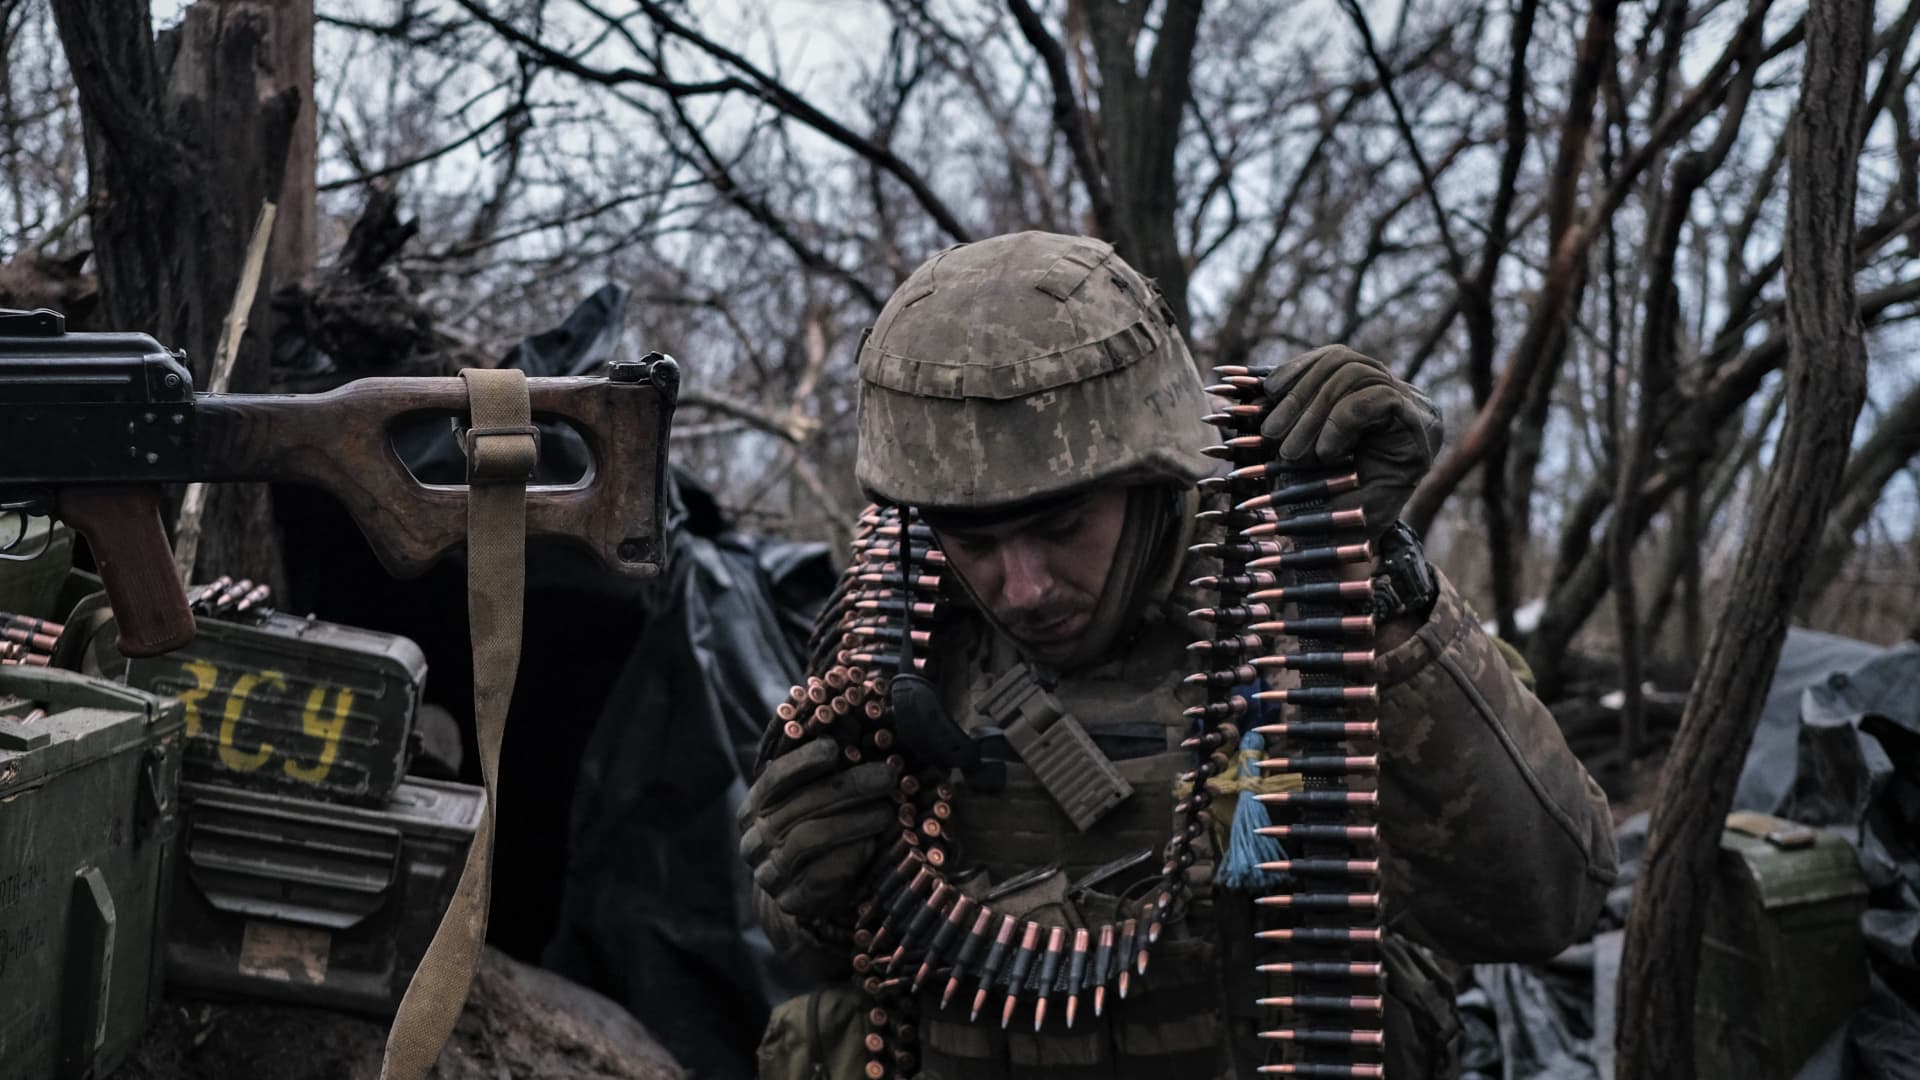 A soldier of the Ukrainian Volunteer Army prepares ammunition to fire at Russian front line positions near Bakhmut, Donetsk region, on March 11, 2023, amid the Russian invasion of Ukraine.